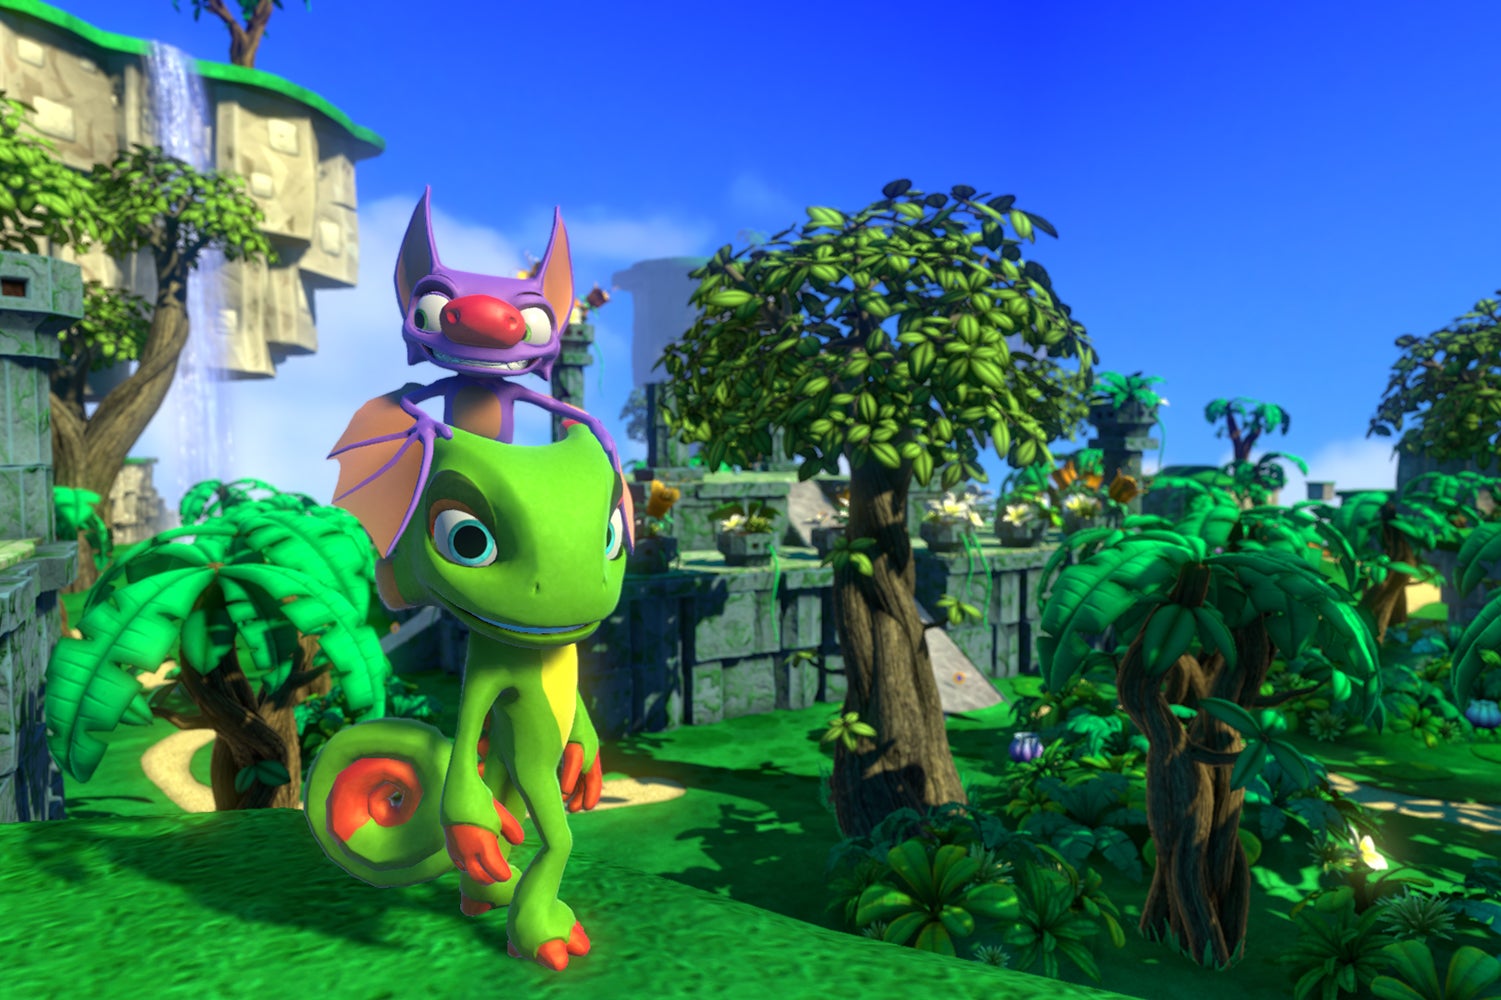 Image for Yooka-Laylee: A Superb Switch Port!